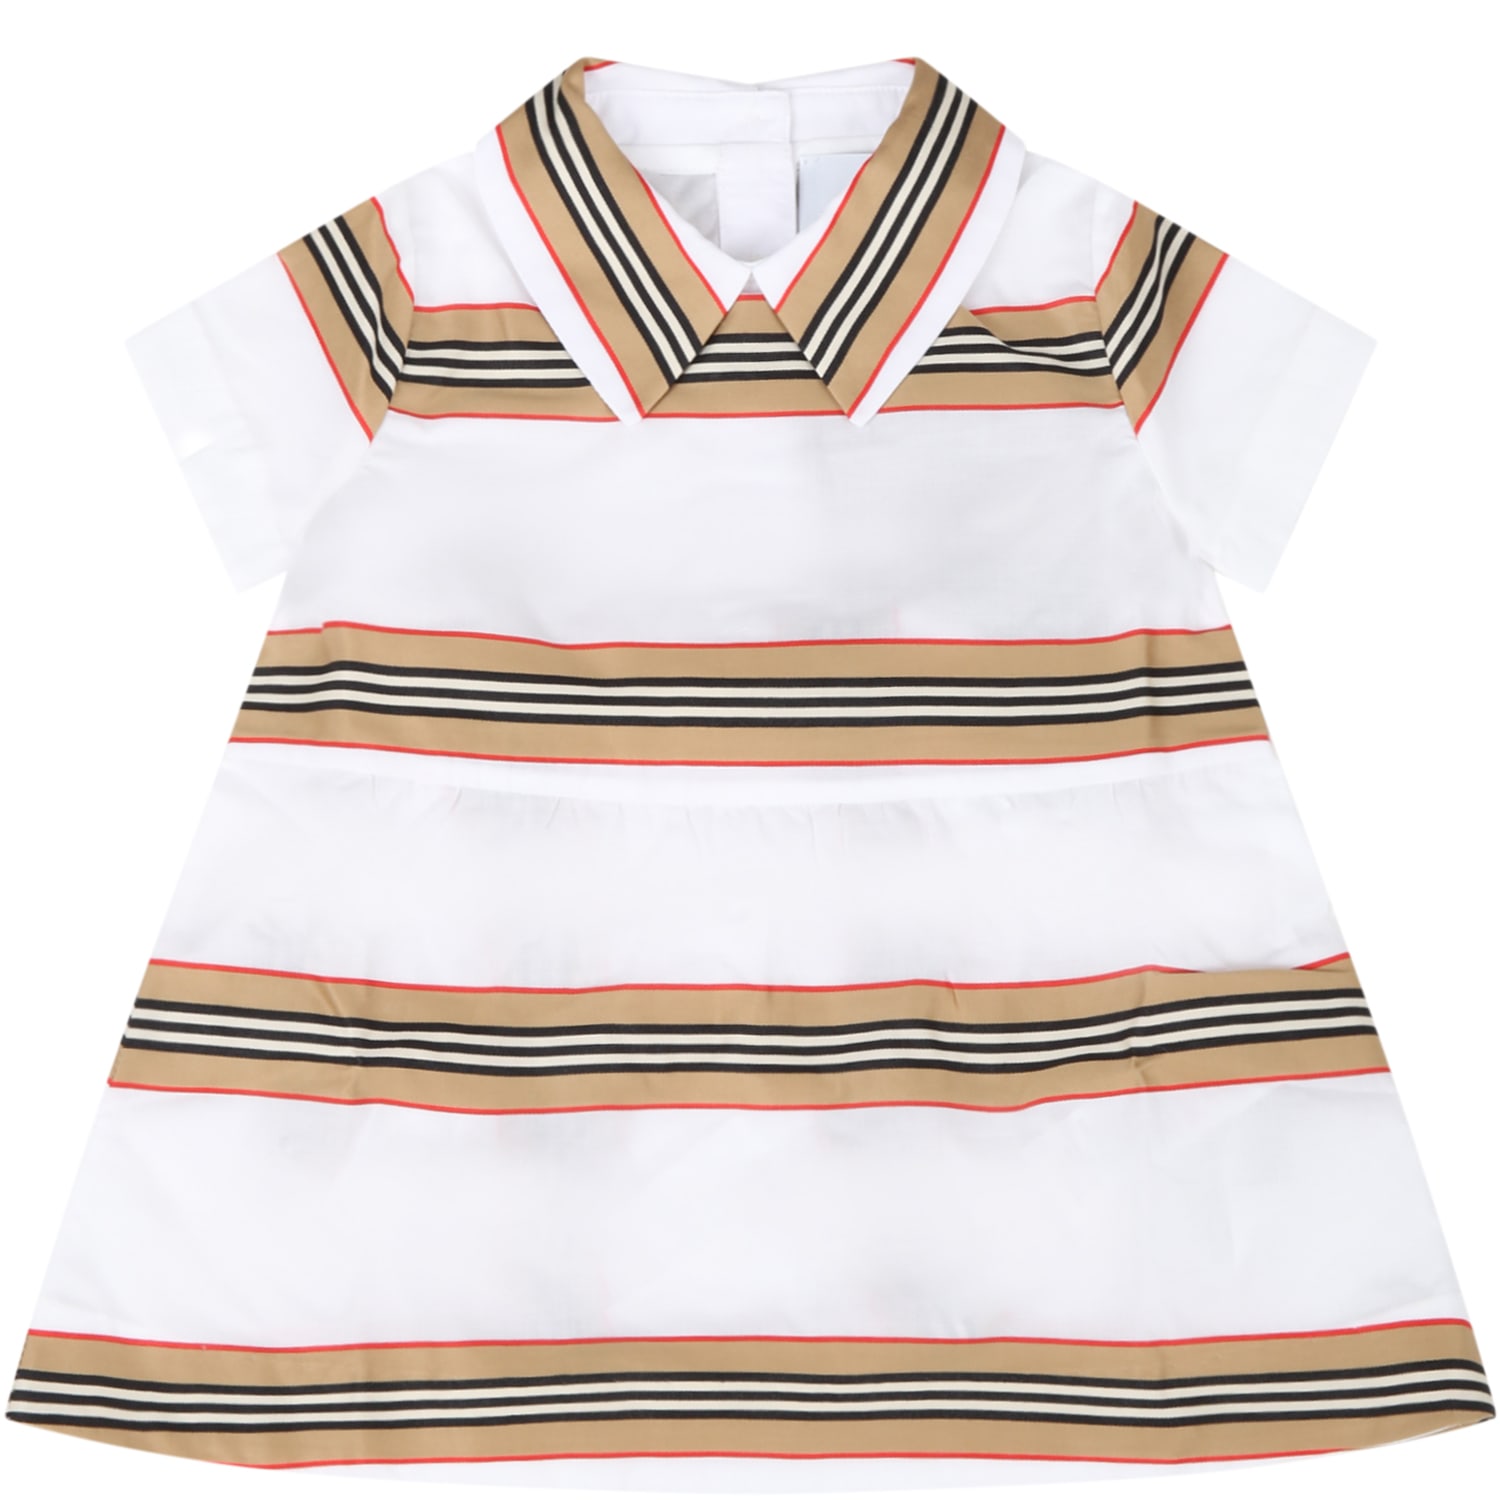 BURBERRY WHITE DRESS FOR BABYGIRL WITH ICONIC STRIPES,8036587